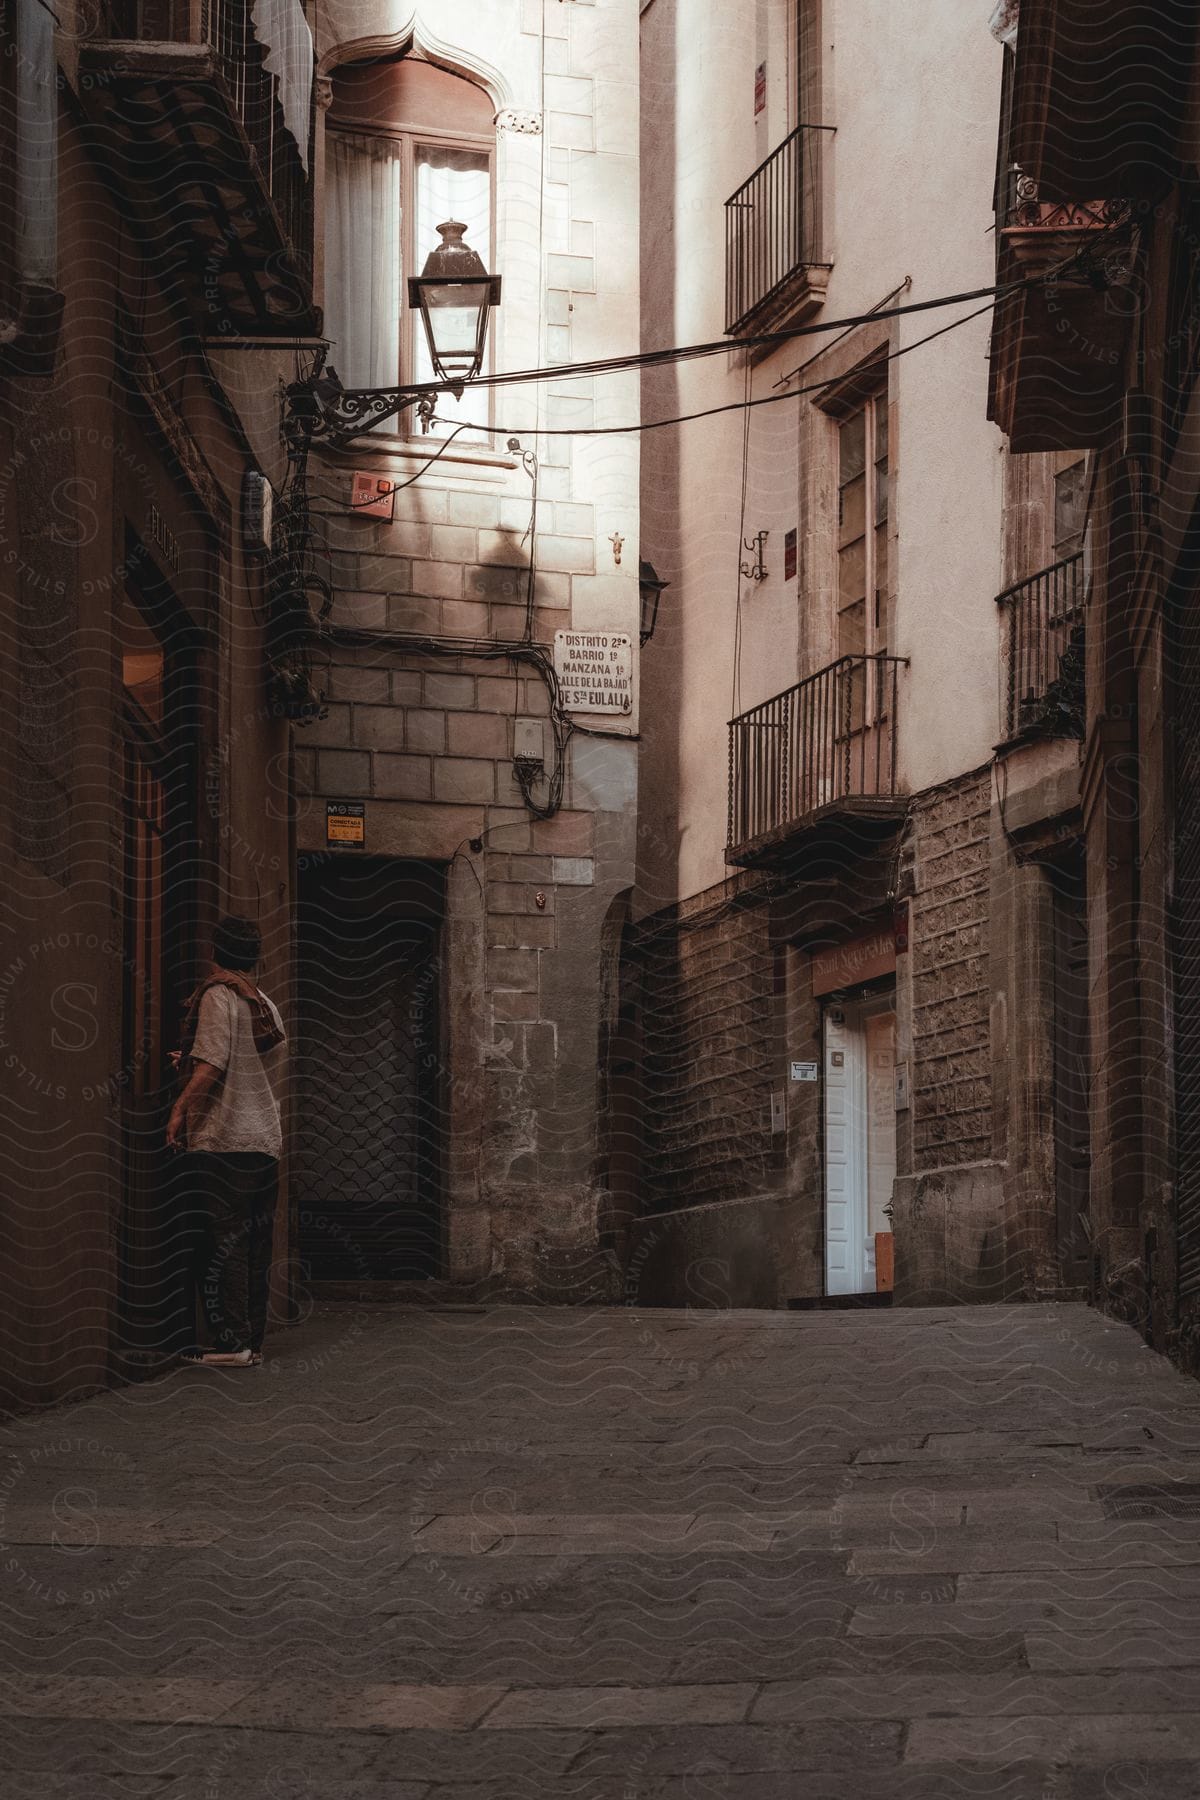 A young boy in a white shirt stands at the door of an establishment in an alley with several doors around it